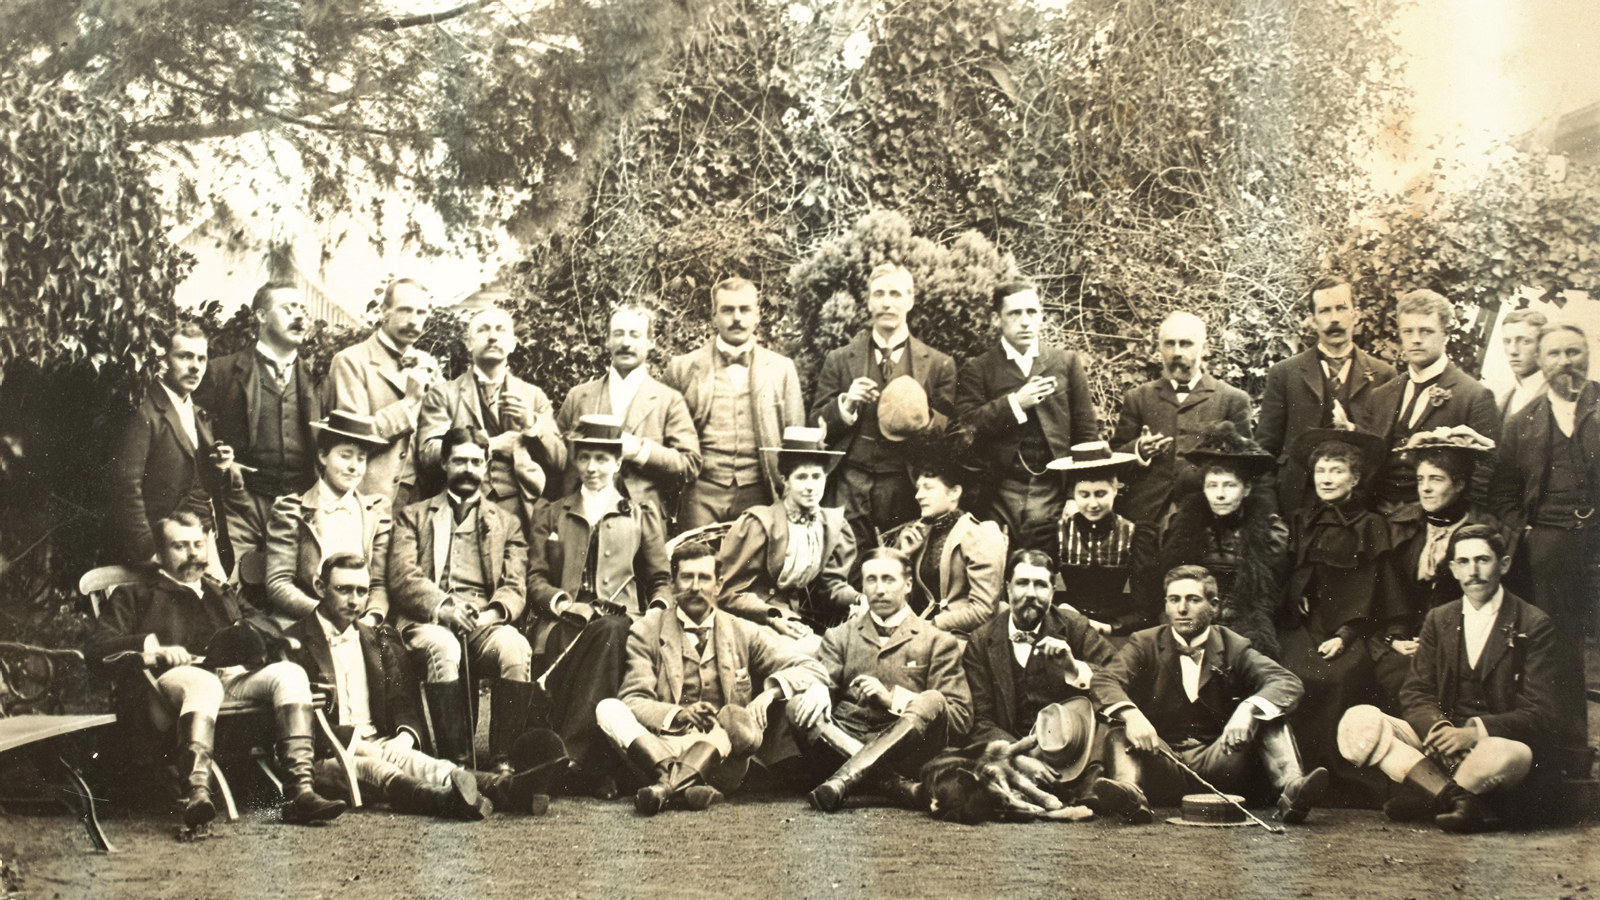 A group of men and women after the hunt, Rouse Hill, 1895